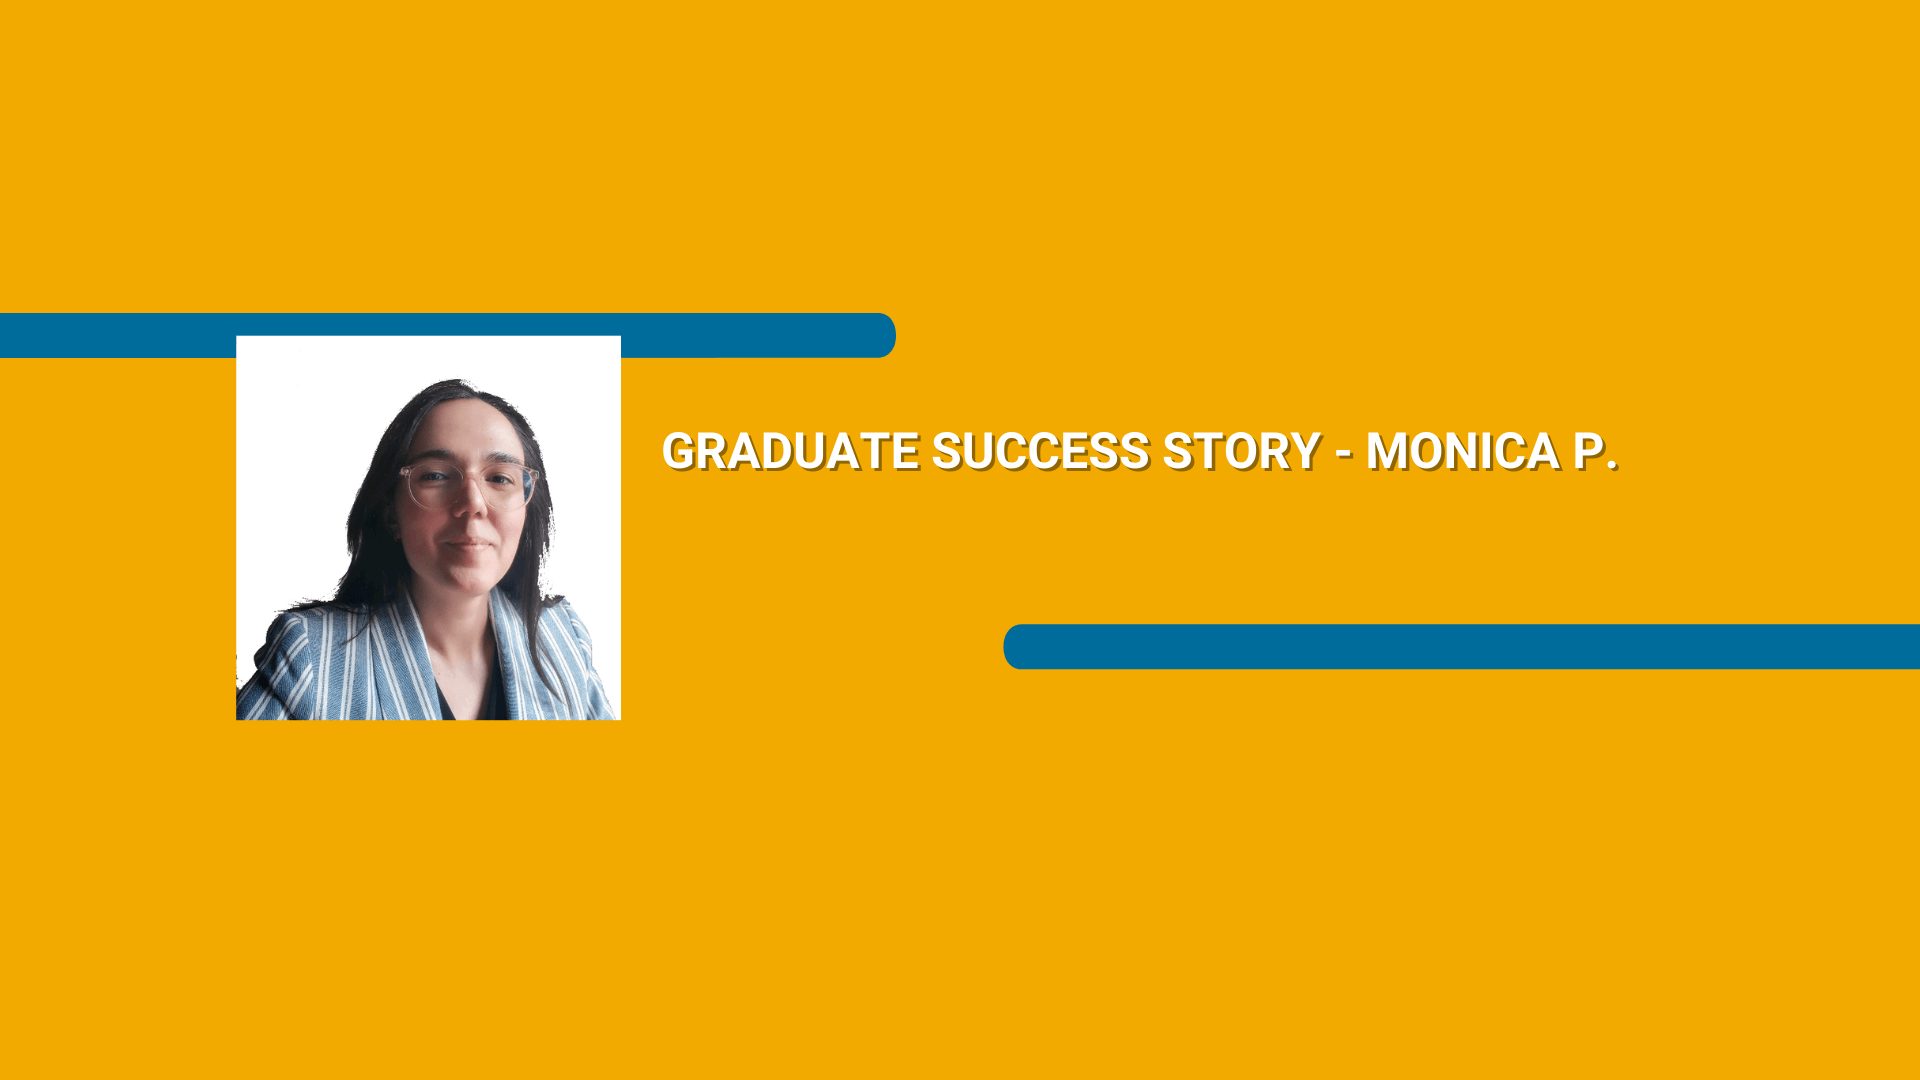 Orange rectangle with a picture of a woman wearing a blazer and Graduate Success Story - Monica P. text in white font